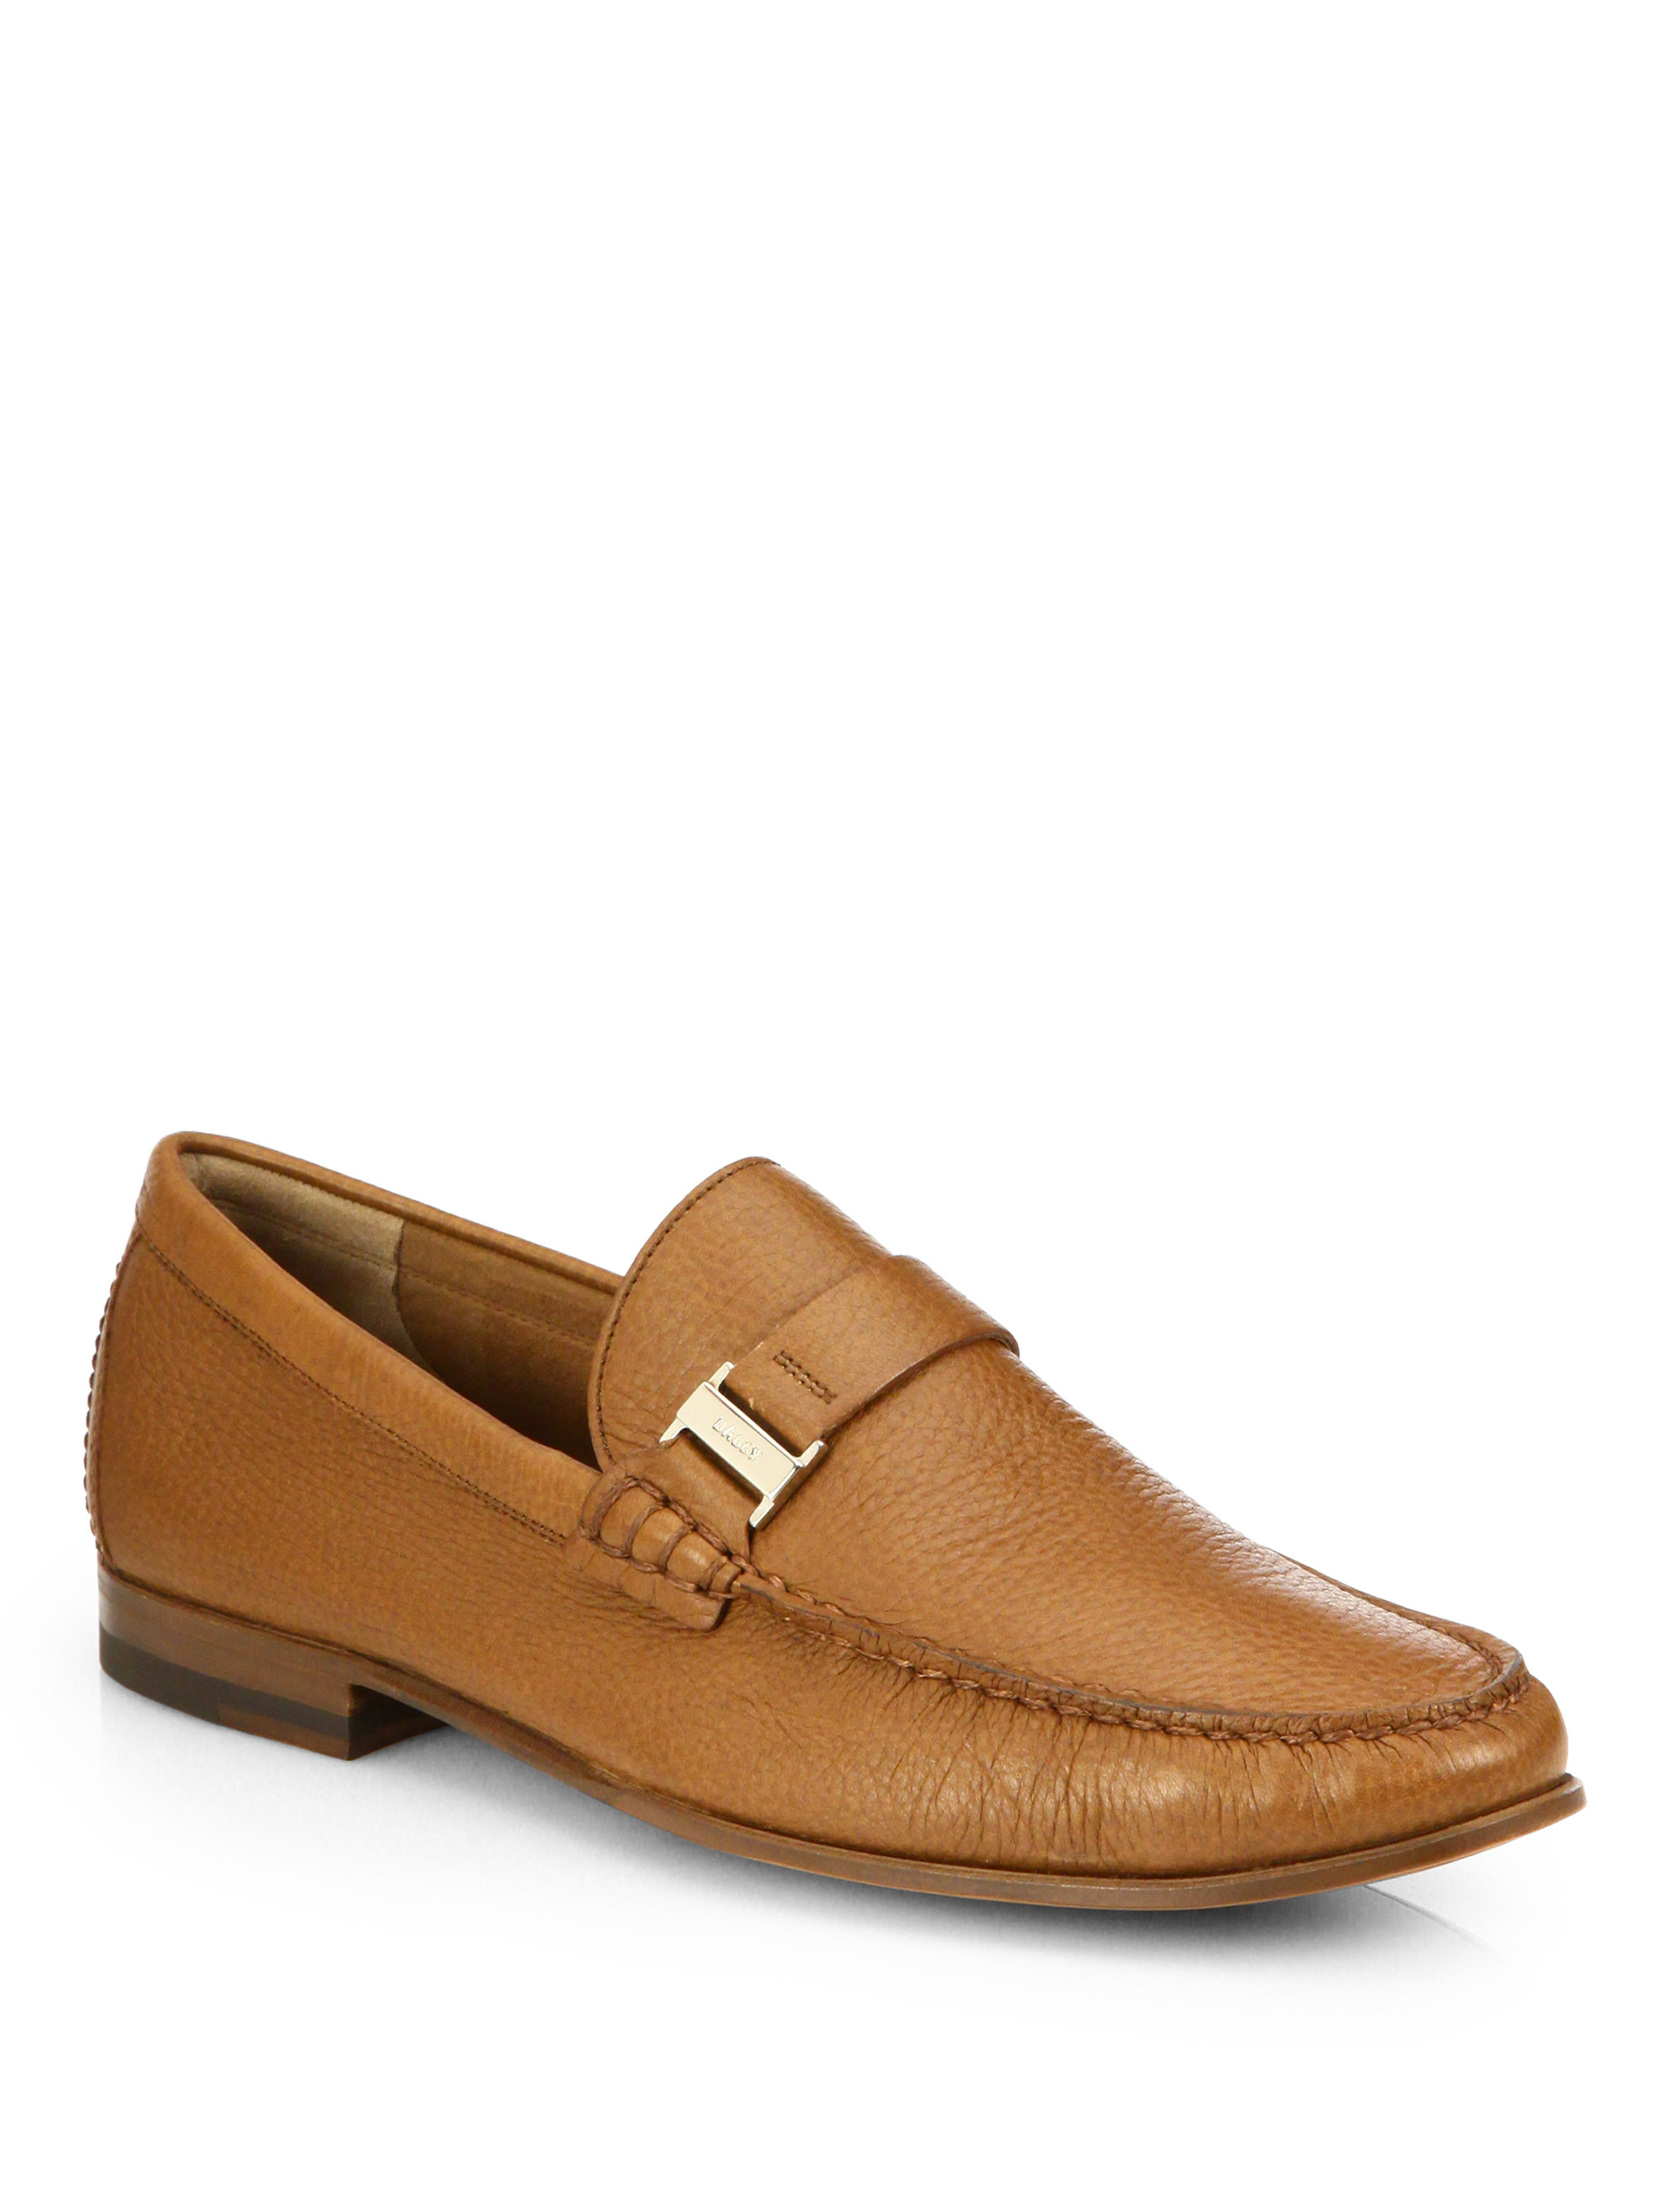 Lyst - Bally Side Buckle Moccasin Loafers in Brown for Men